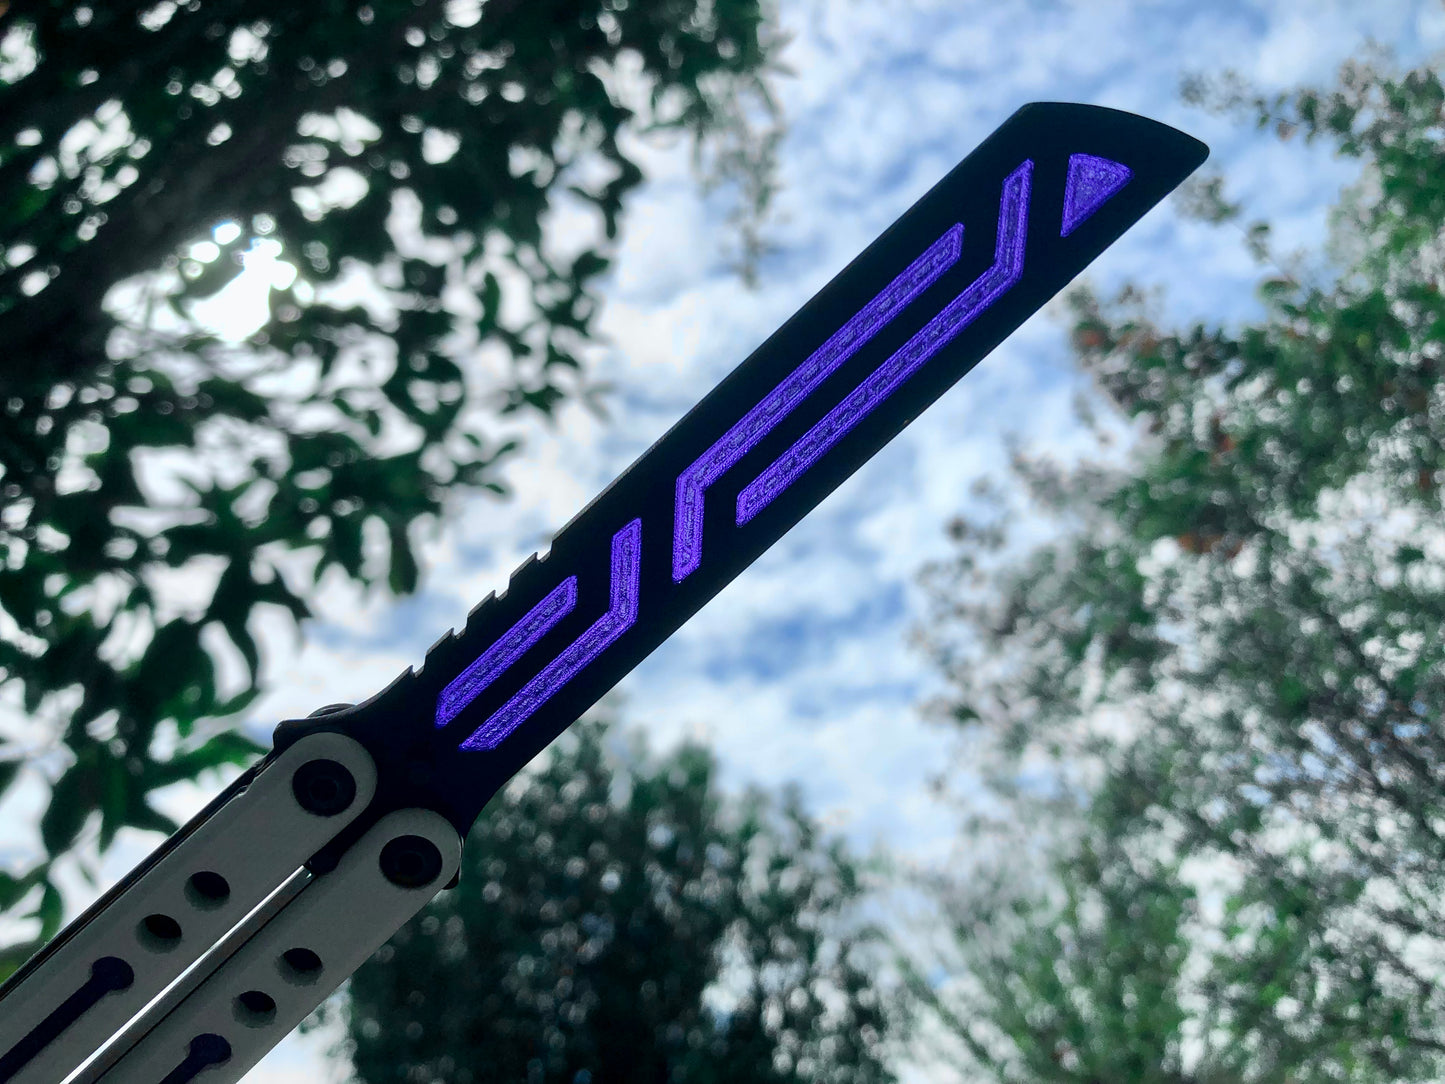 Modify the balance and add a pop of color to your Squid industries Nautilus balisong trainer with these polyurethane blade inserts and handle inlays. The objective of this mod is to add blade weight for a slightly more neutral balance, with optional cosmetic handle inlays to add a pop of color.